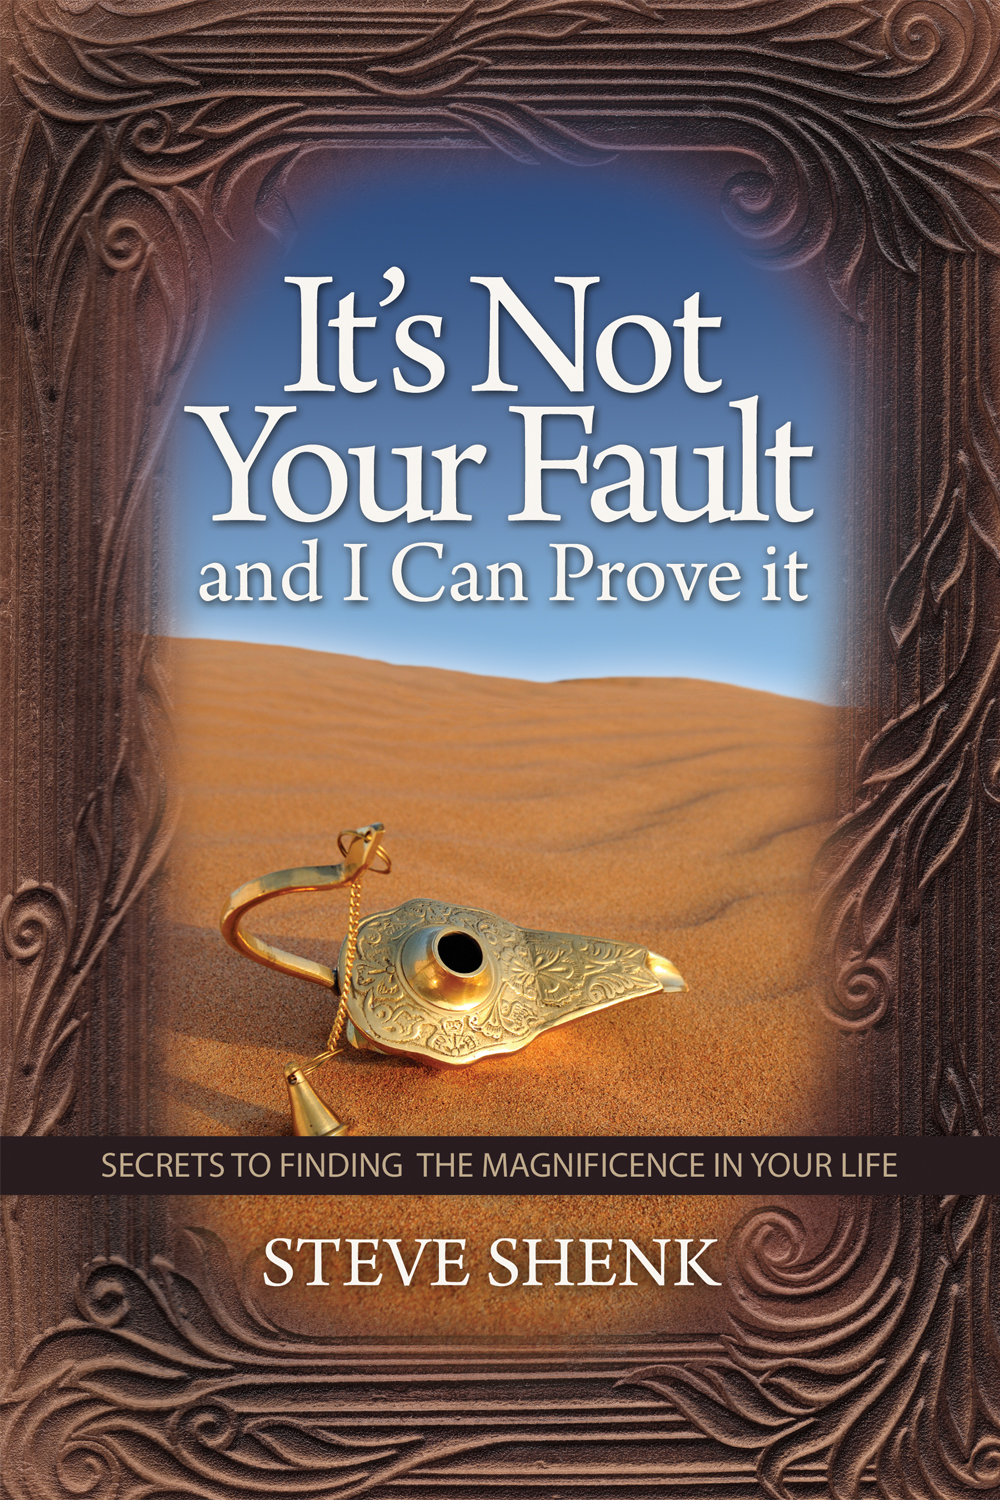 Ready to live a Charmed Life? New It s Not Your Fault Seminar with